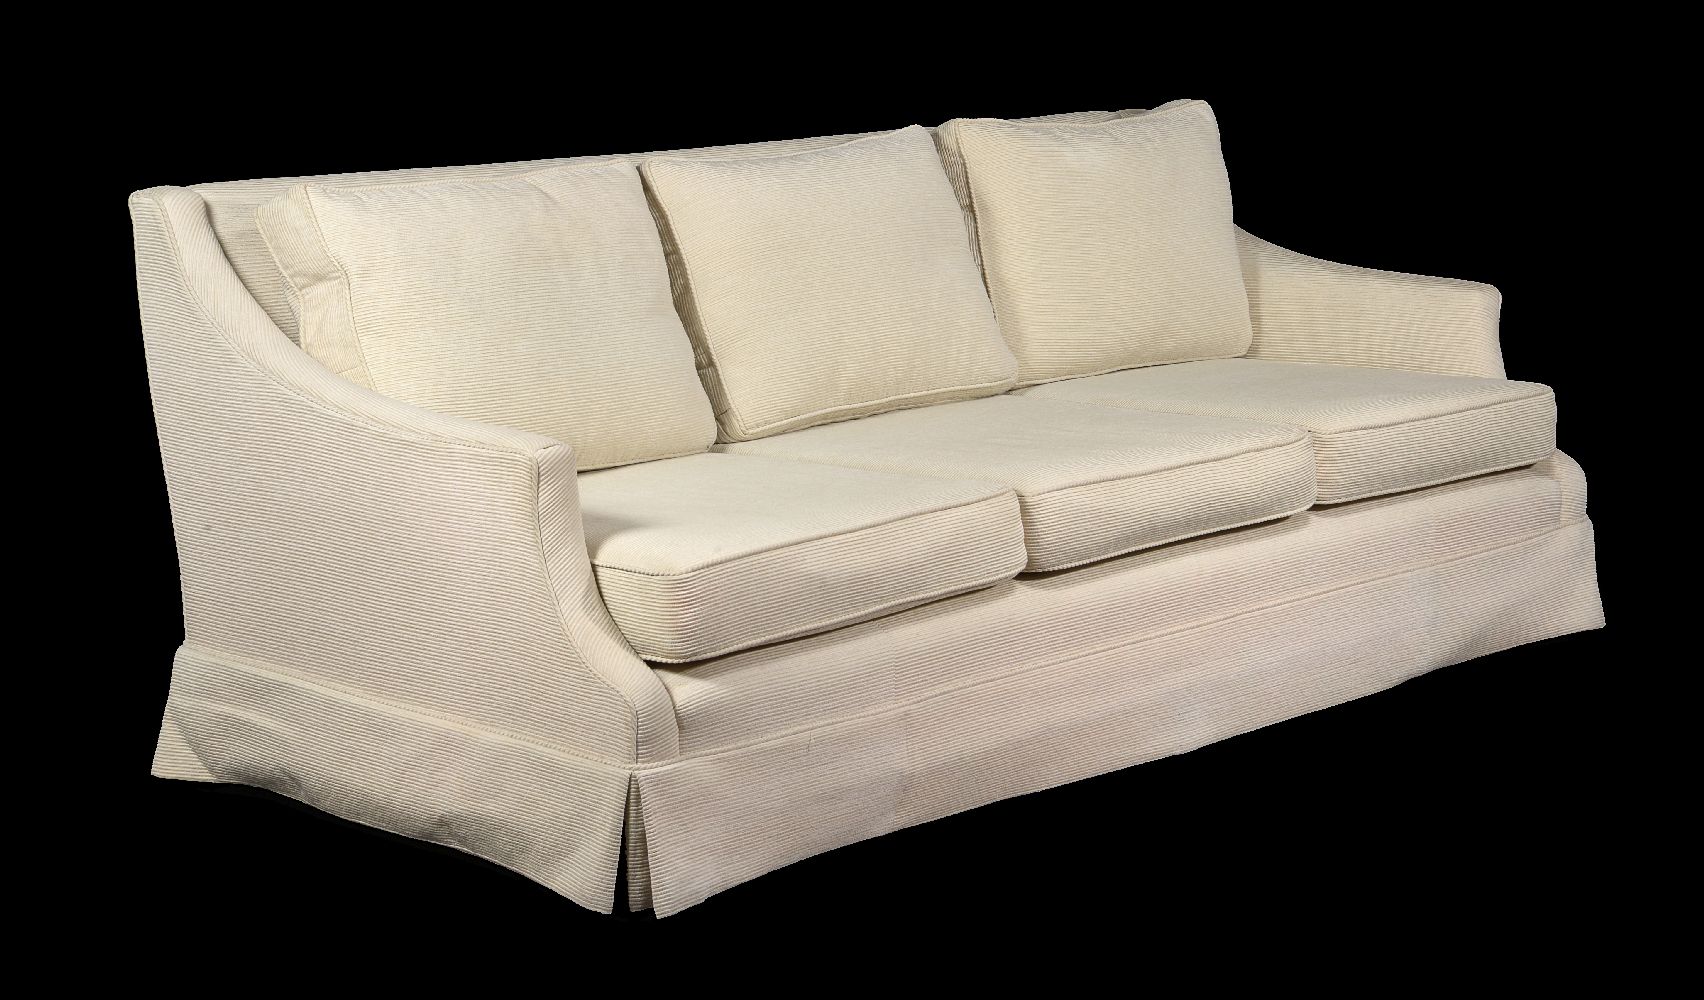 A pair of George Smith beige striped chenille upholstered sofas